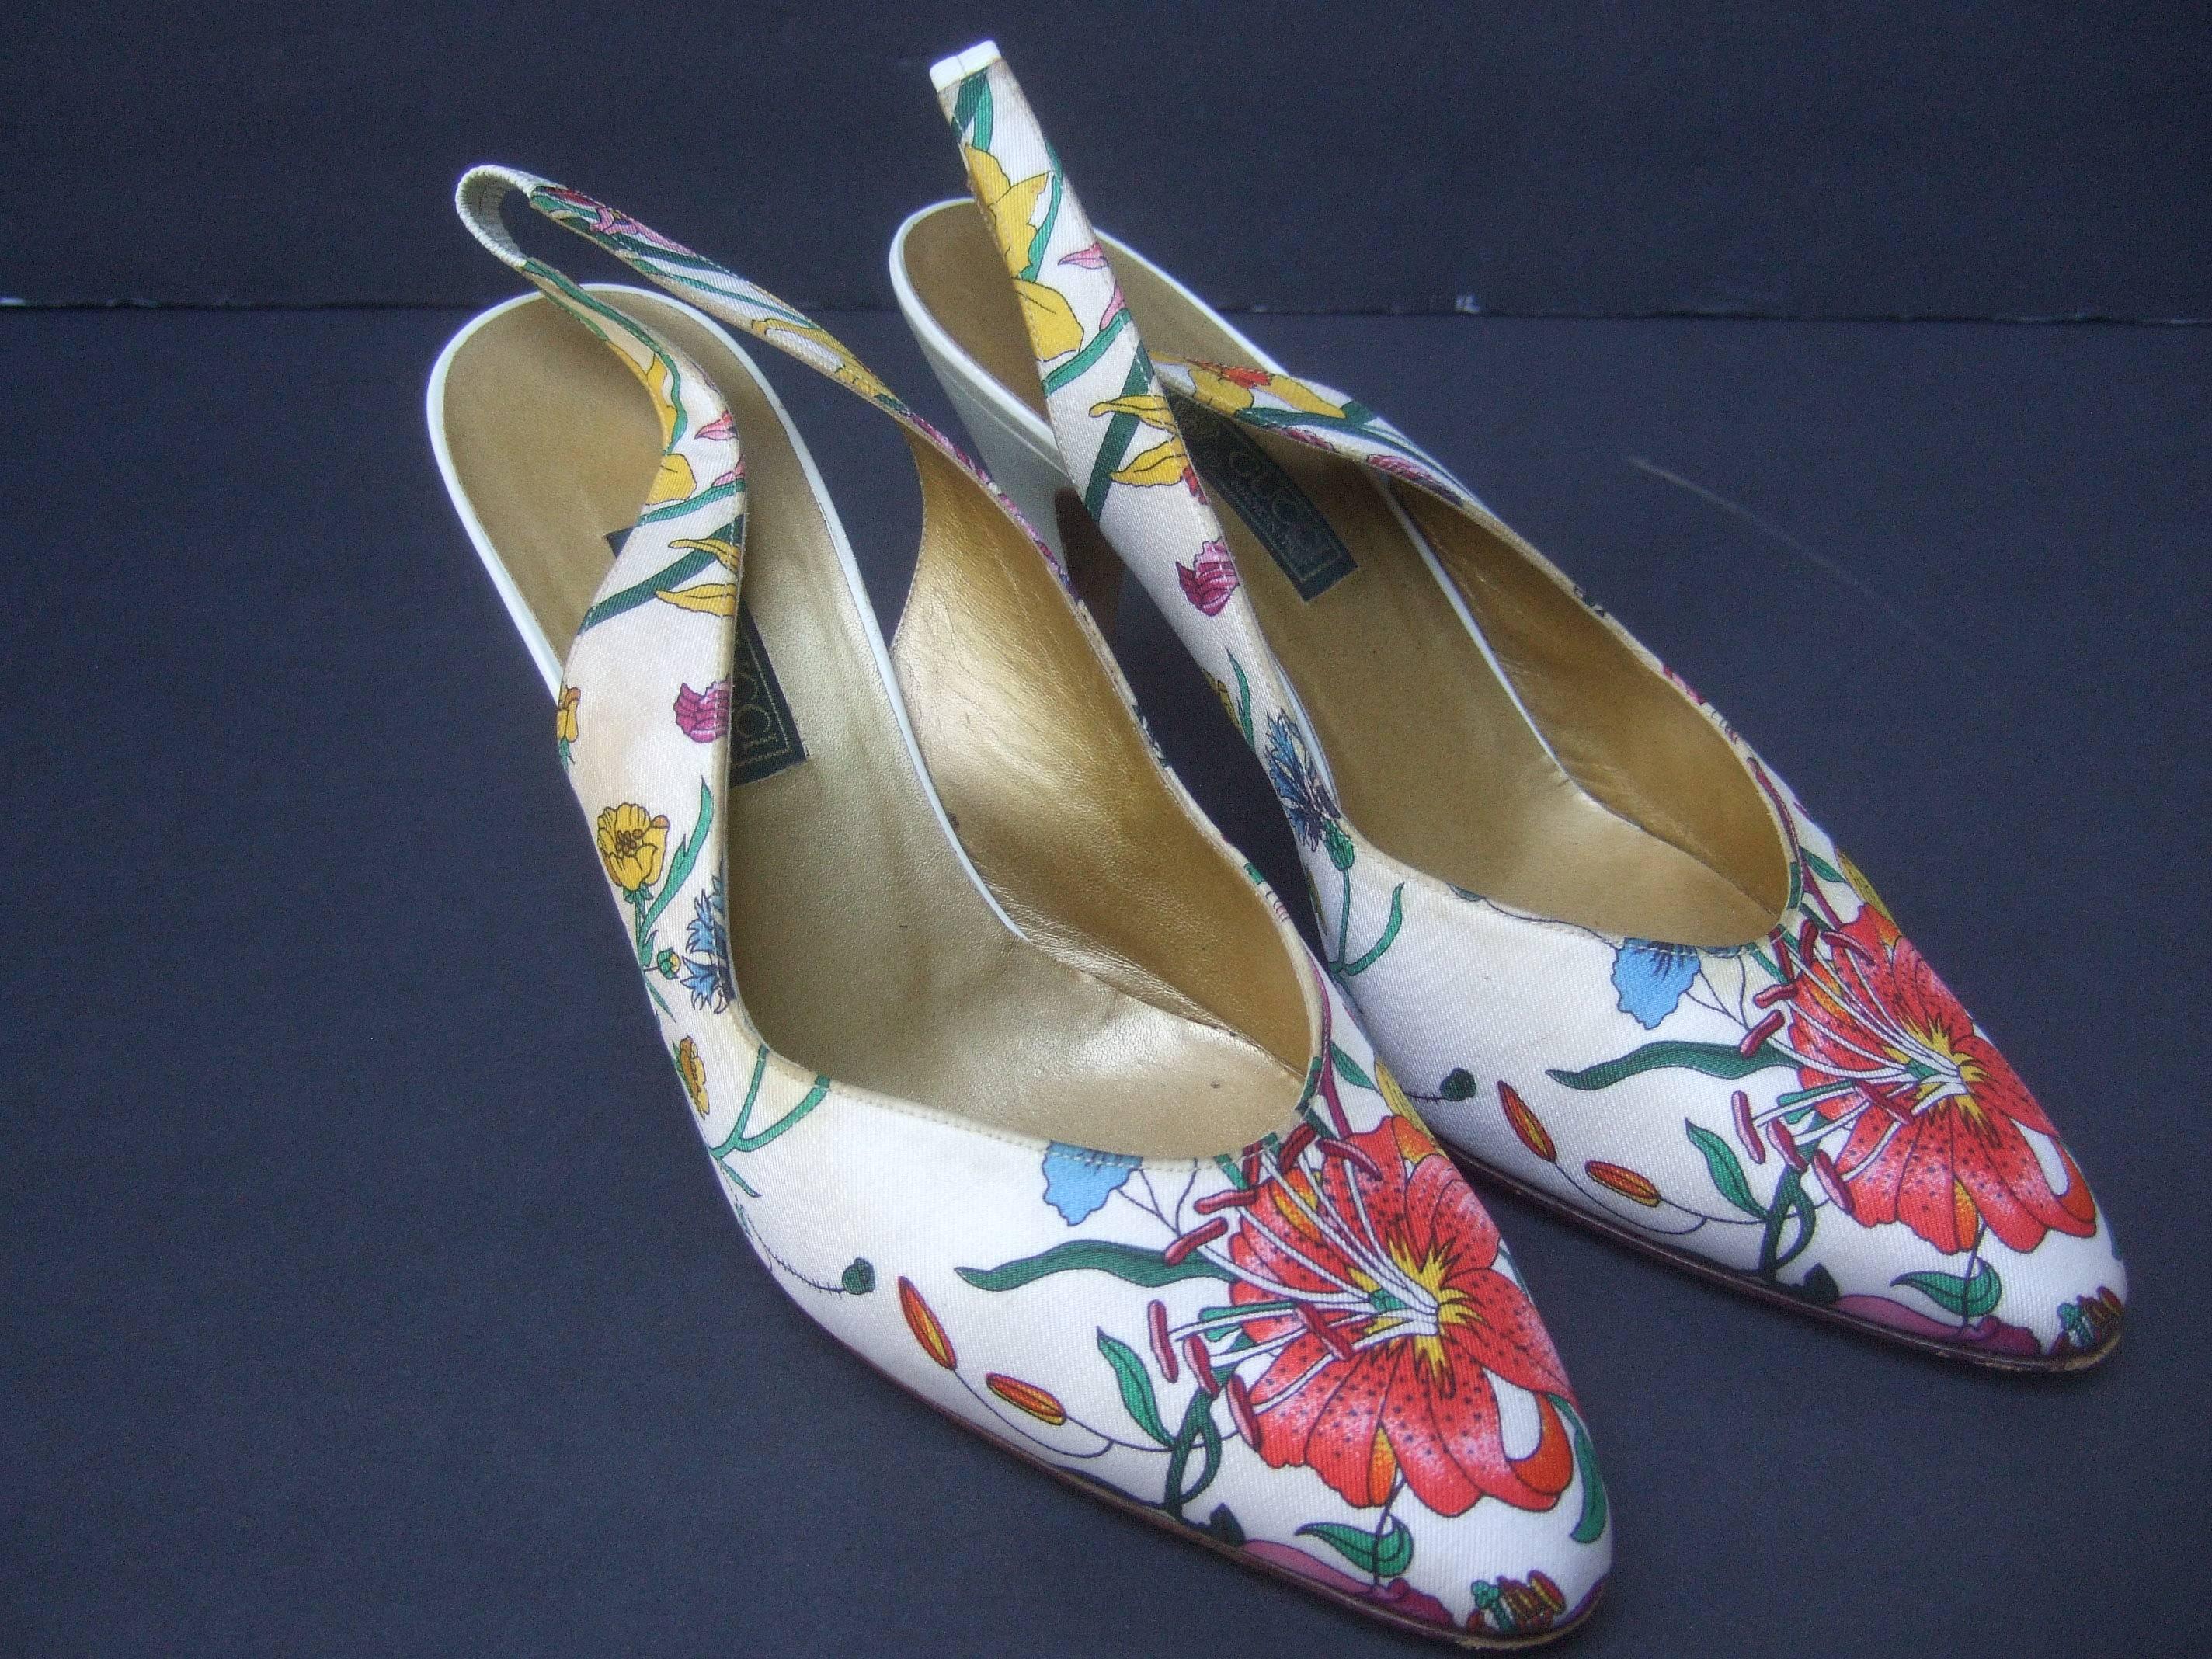 GUCCI Rare silk floral print slingback pumps Size 40
The chic Italian heels are designed with vibrant 
flower blooms throughout 

The heels are covered with crisp white leather
The Italian slingback pumps are designed
with an elastic tab on